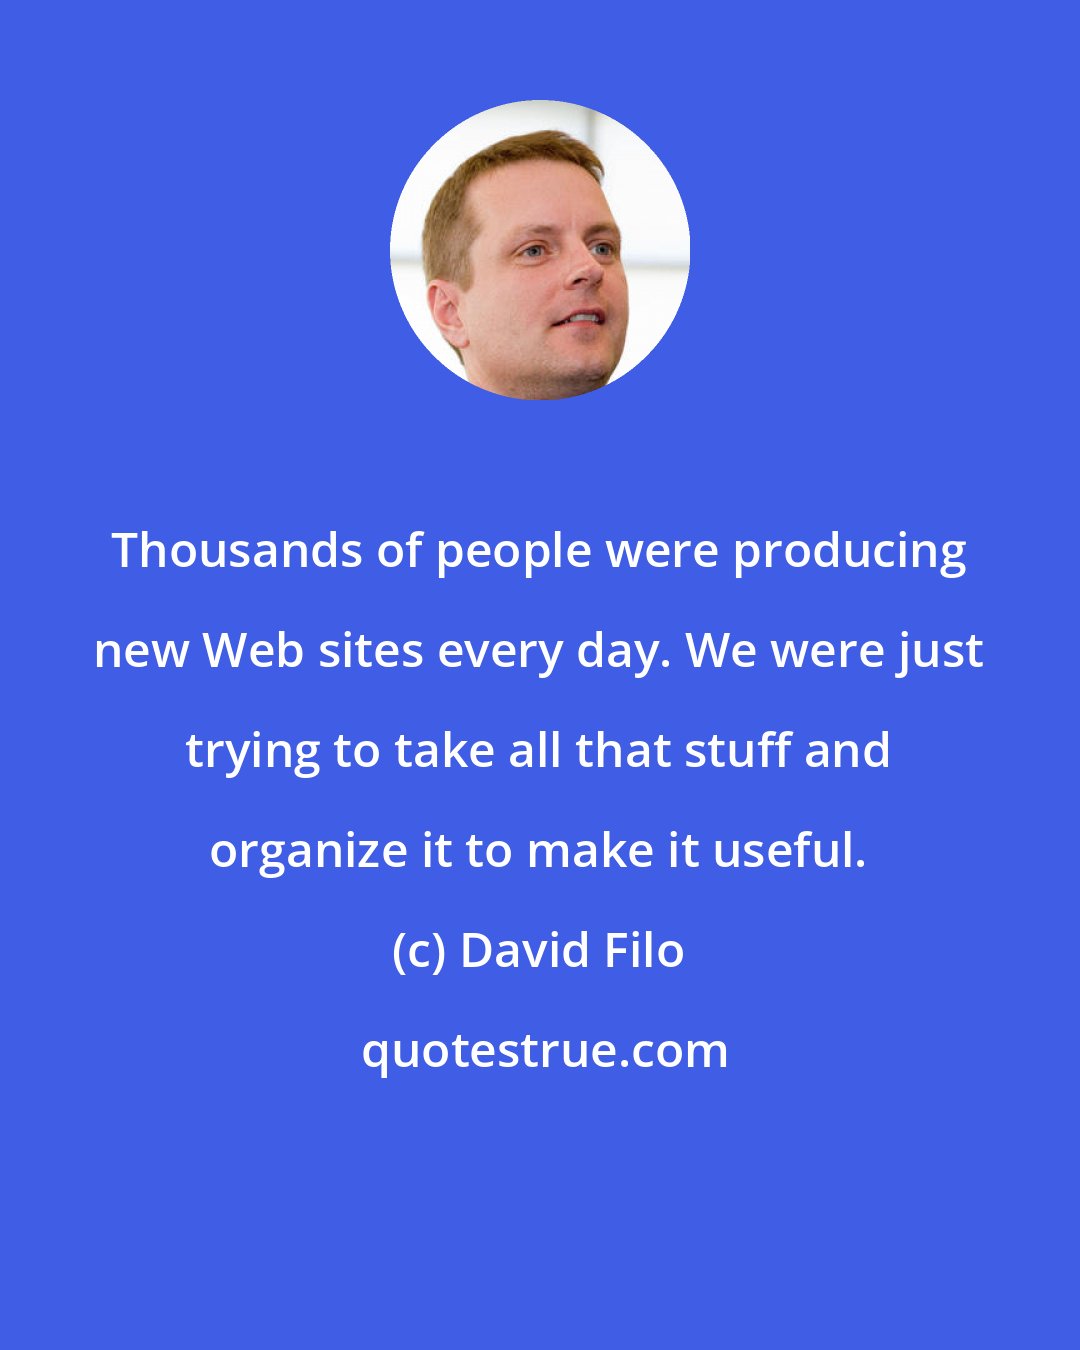 David Filo: Thousands of people were producing new Web sites every day. We were just trying to take all that stuff and organize it to make it useful.